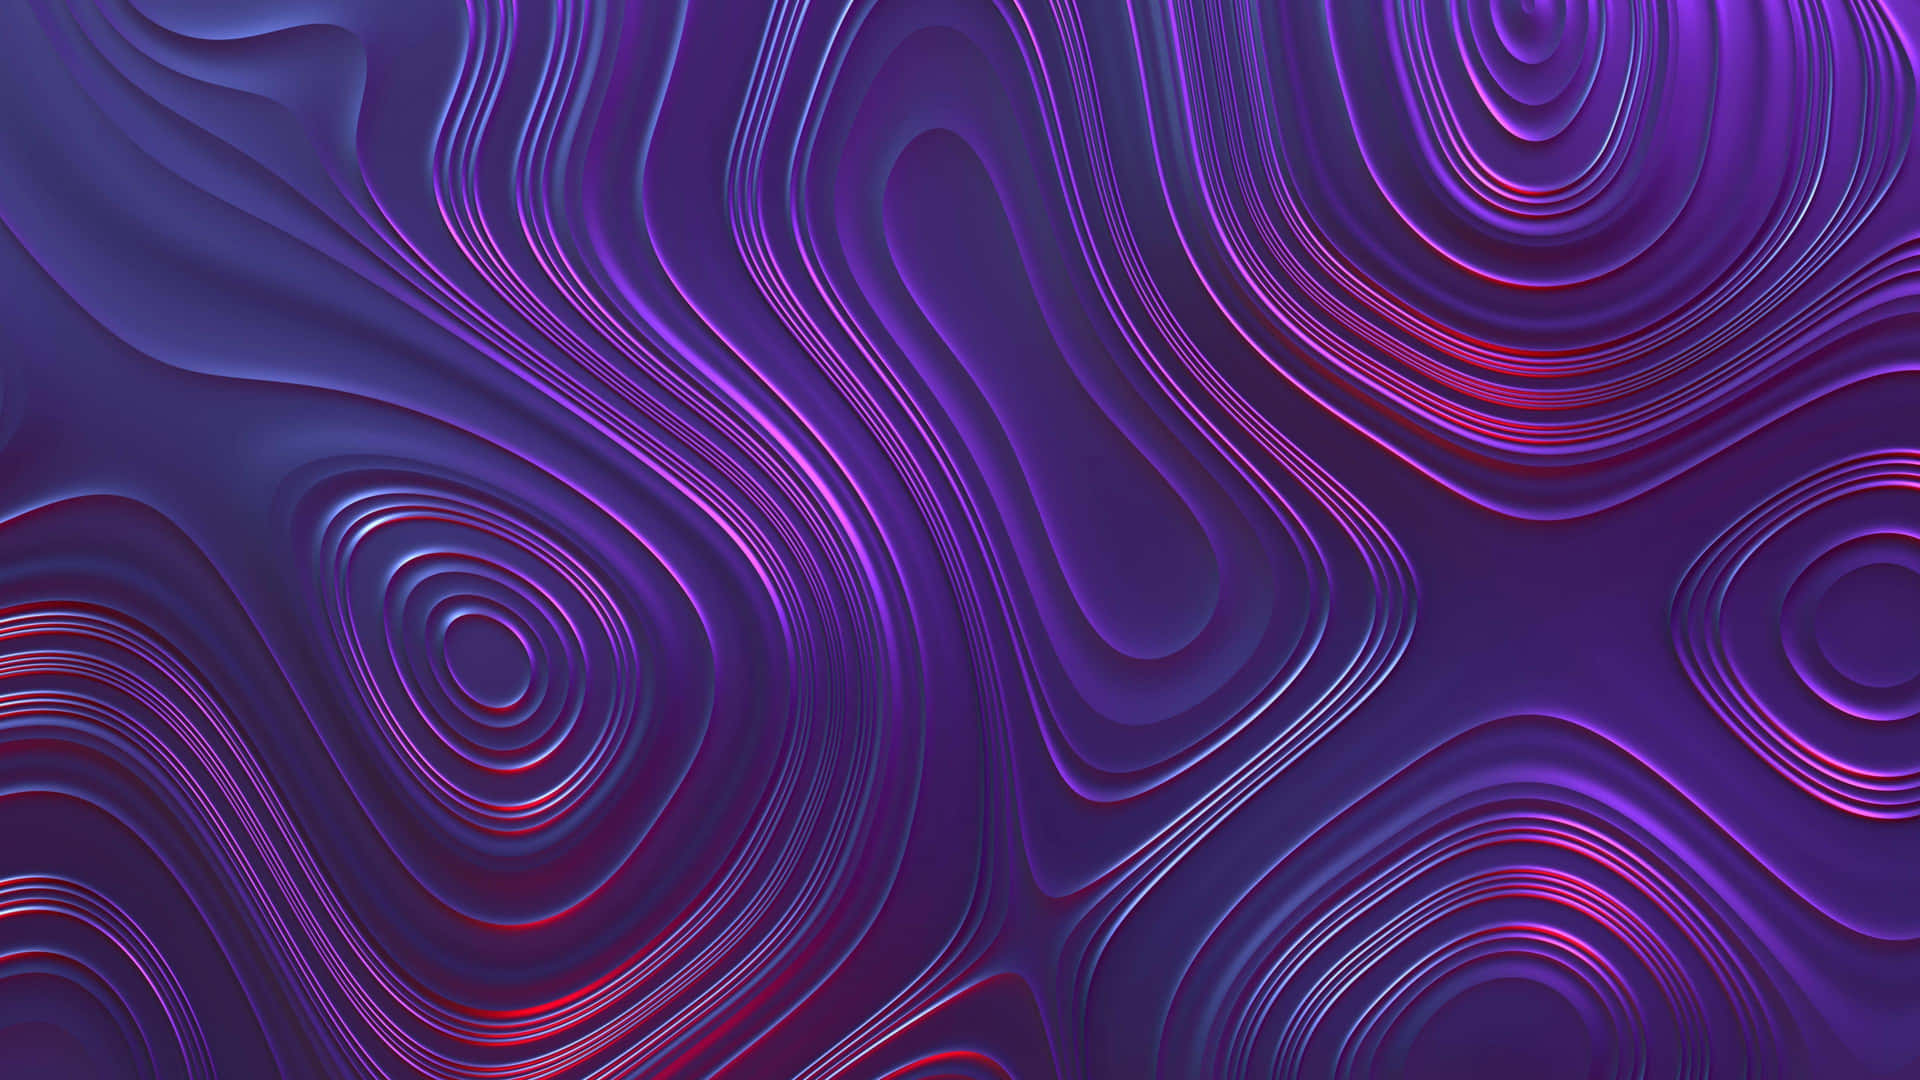 Caption: Mesmerizing Abstract Waves In 4k Resolution Wallpaper